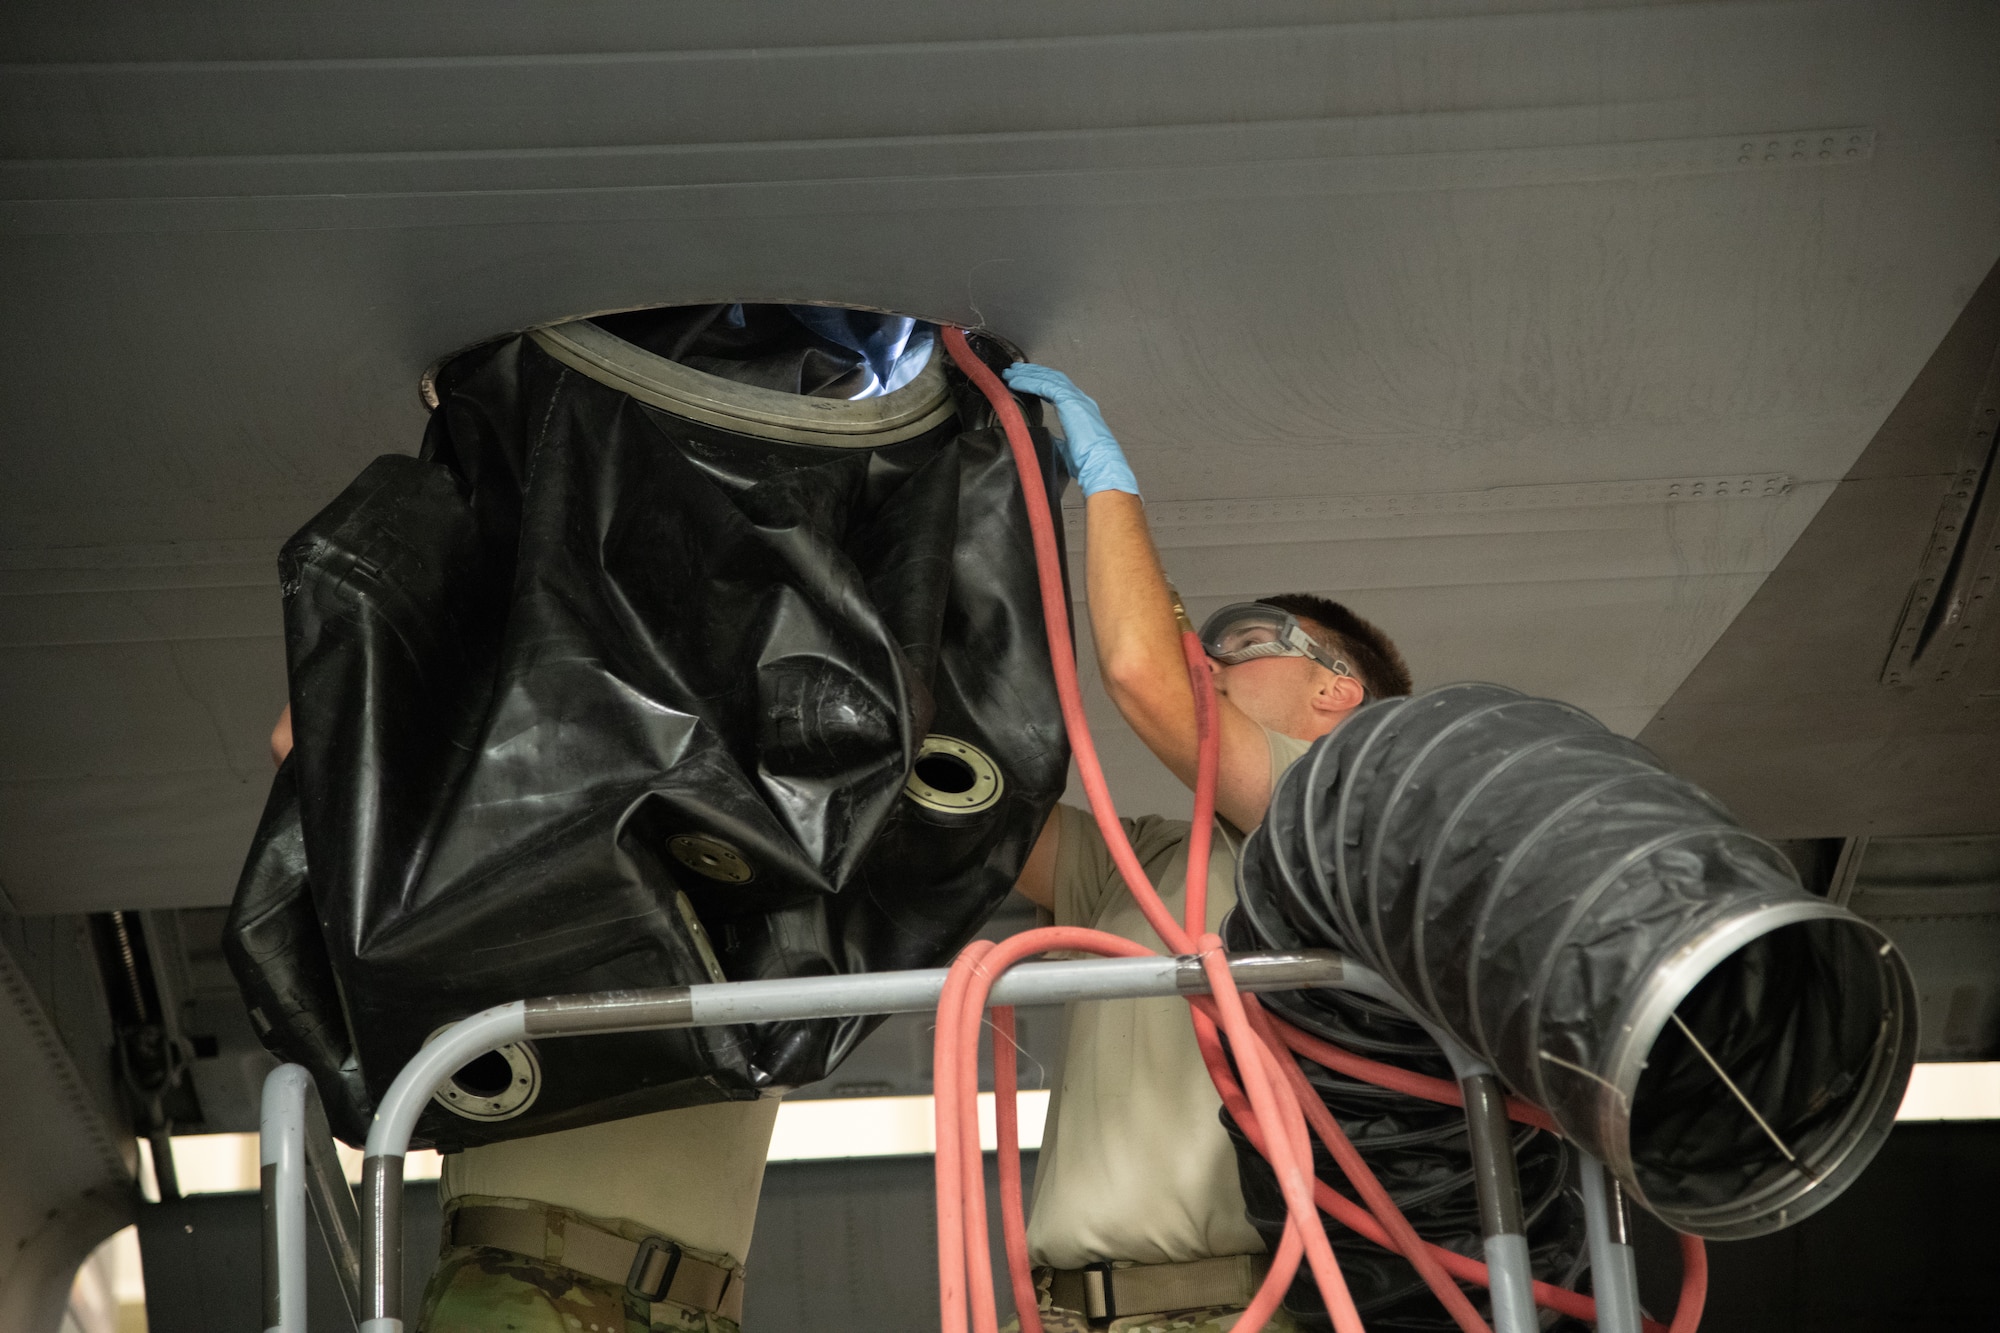 Fuel system technicians pull a fuel cell out from a door on the underside of a C-130 aircraft wing.